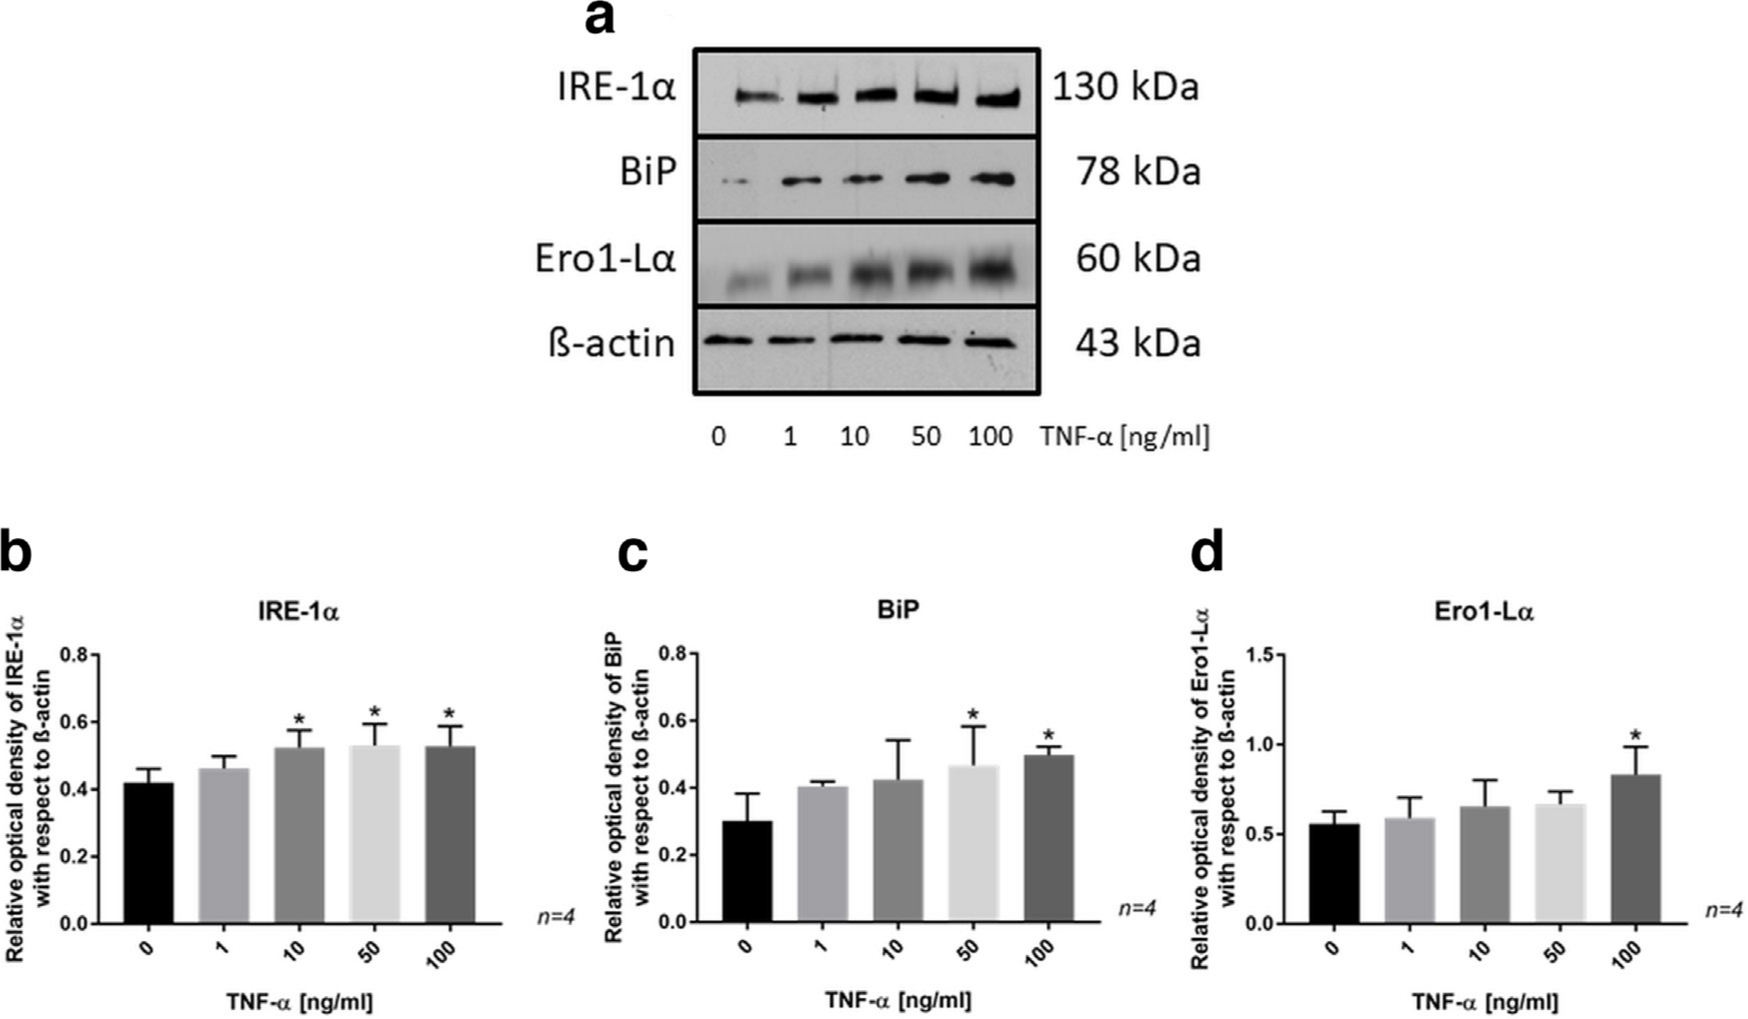 Fig. 5 
            a) Western blot showing the protein expression of inositol-requiring enzyme (IRE)-1α, binding-immunoglobulin protein (BiP), and endoplasmic reticulum (ER)-residing protein endoplasmic oxidoreductin1–Lα (Ero1-Lα) in SaOs-2 cells treated with tumour necrosis factor-alpha (TNF-α) for 24 hours. b) to d) Bar charts from protein analysis by western blotting showing significant changes in protein expression between control and TNF-α-treated SaOs-2 cells. Data are presented as the mean ± SD. *p < 0.05 versus control group, evaluated by one-way analysis of variance followed by post-hoc analysis using Dunnett’s multiple comparisons test.
          